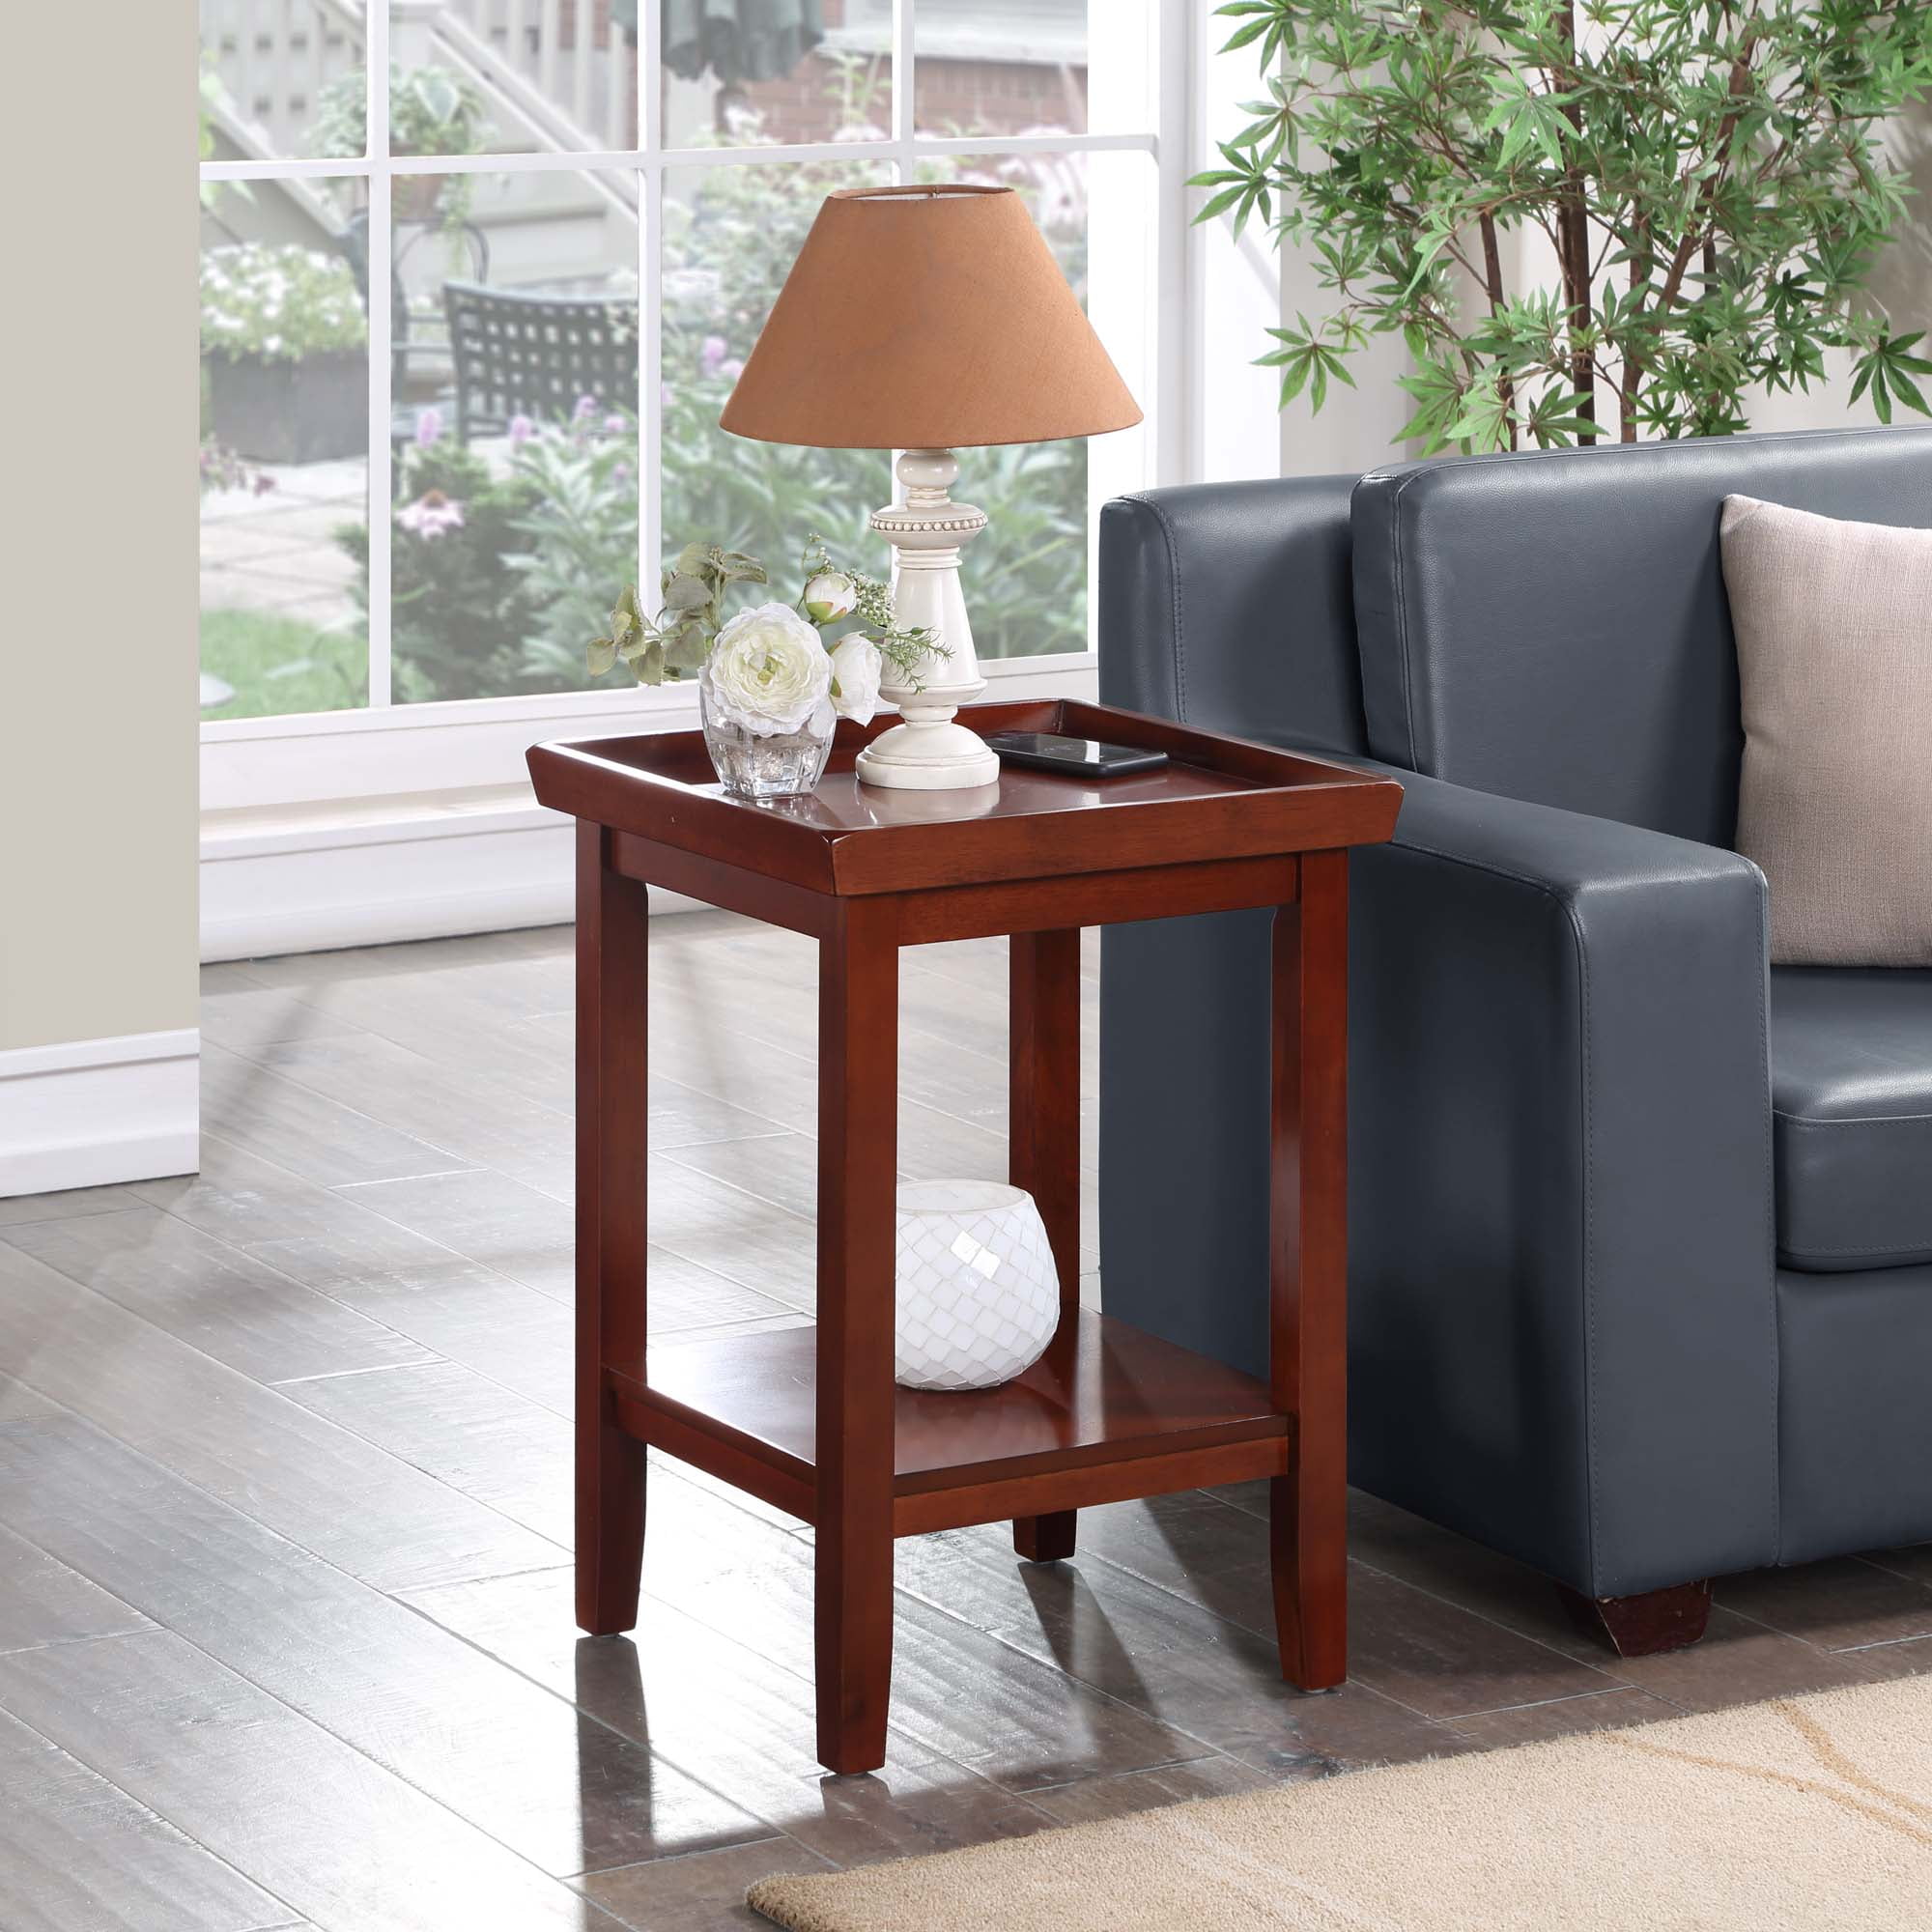 Convenience Concepts Ledgewood End Table with Shelves, Mahogany 